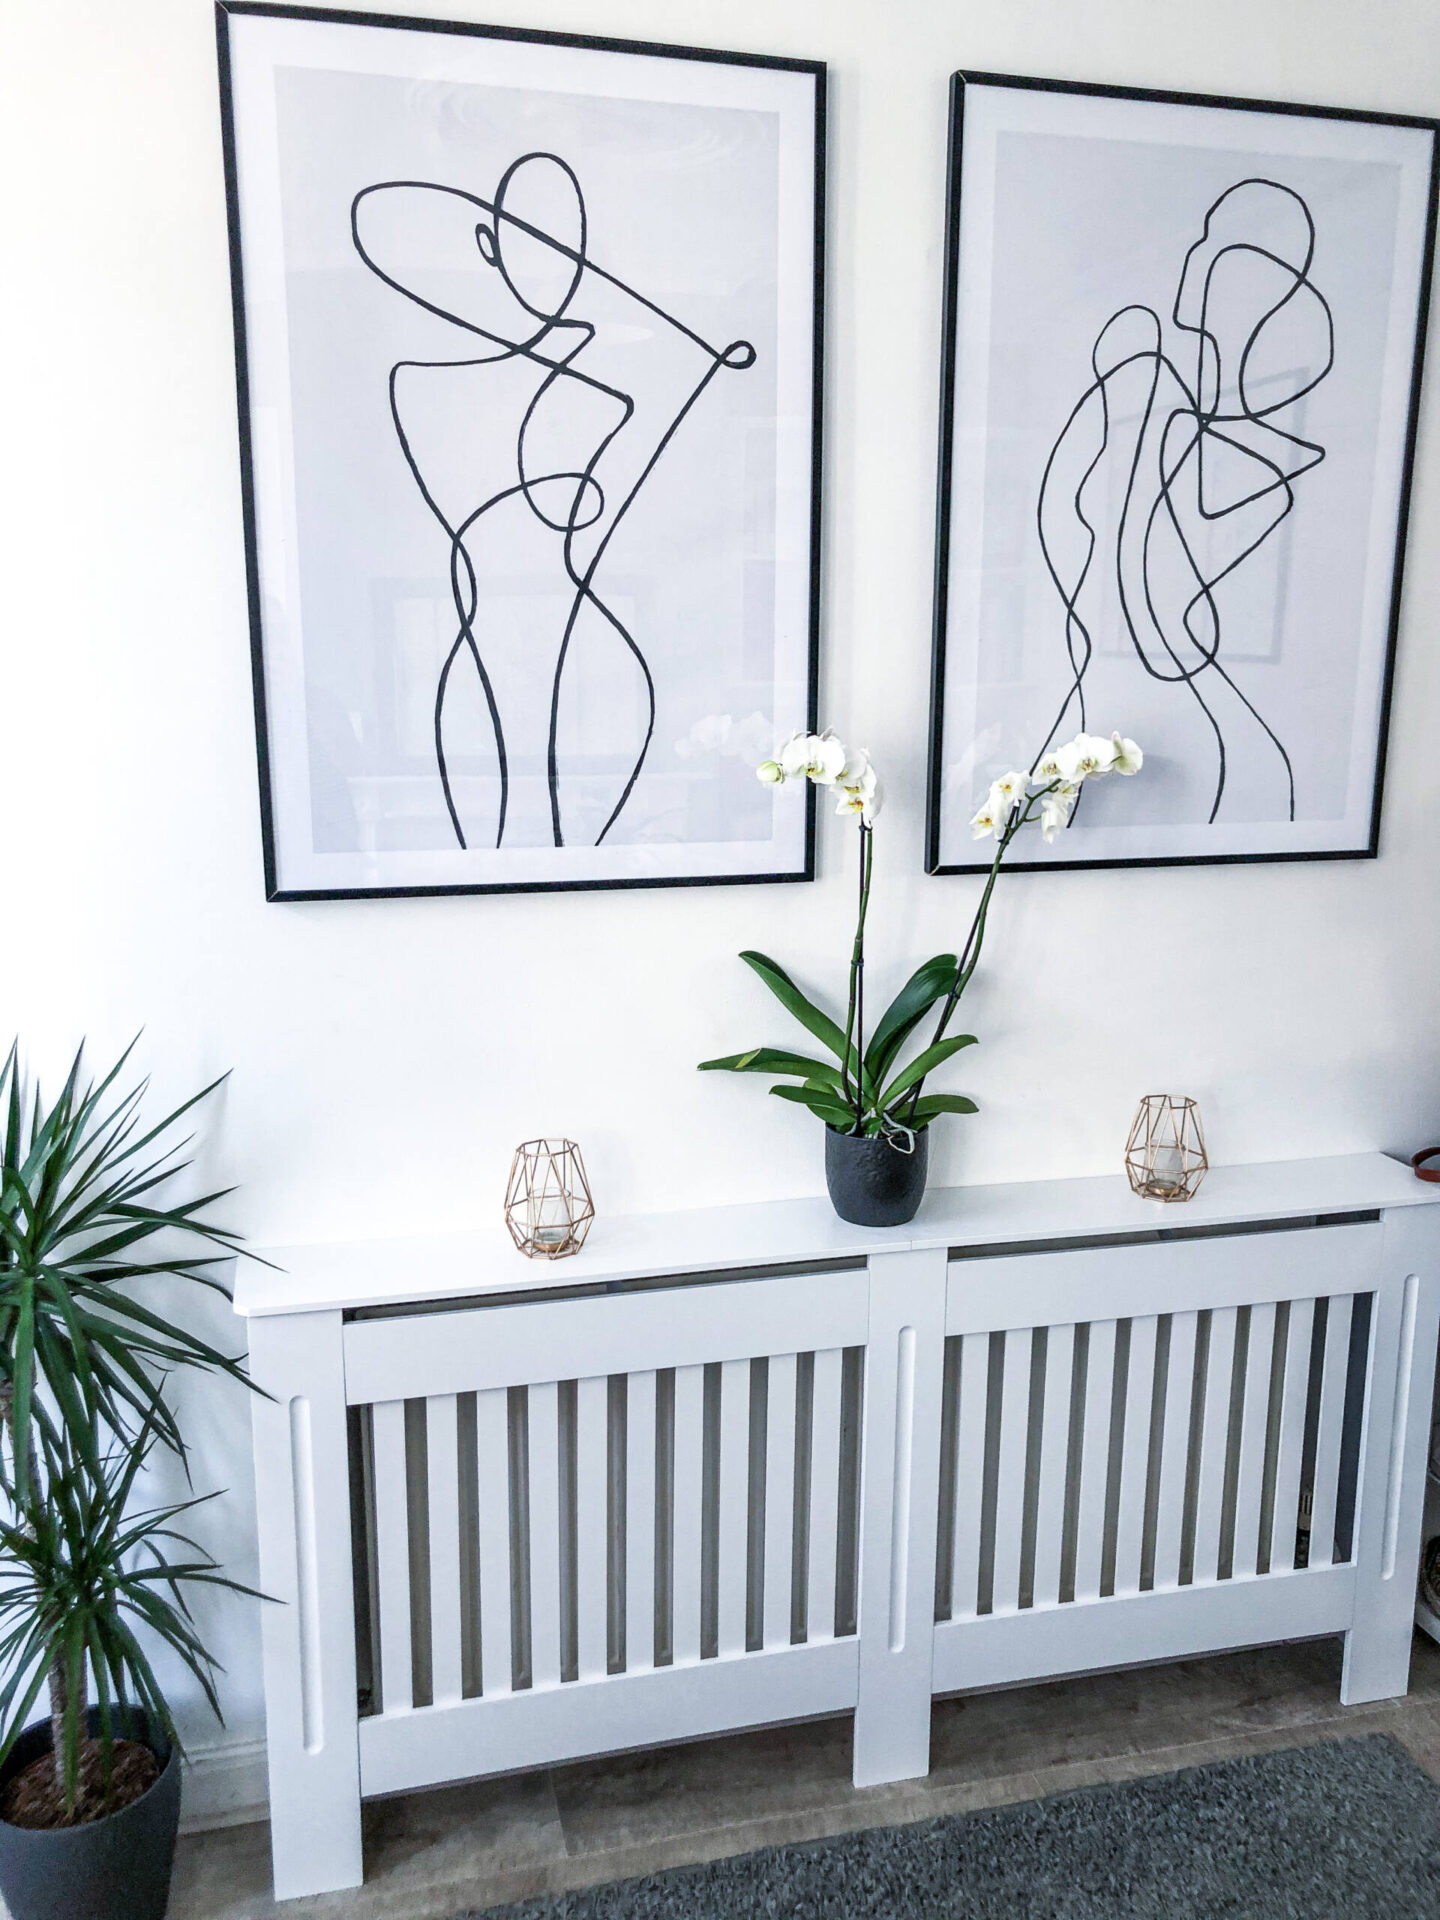 Desenio line art posters above a radiator cover